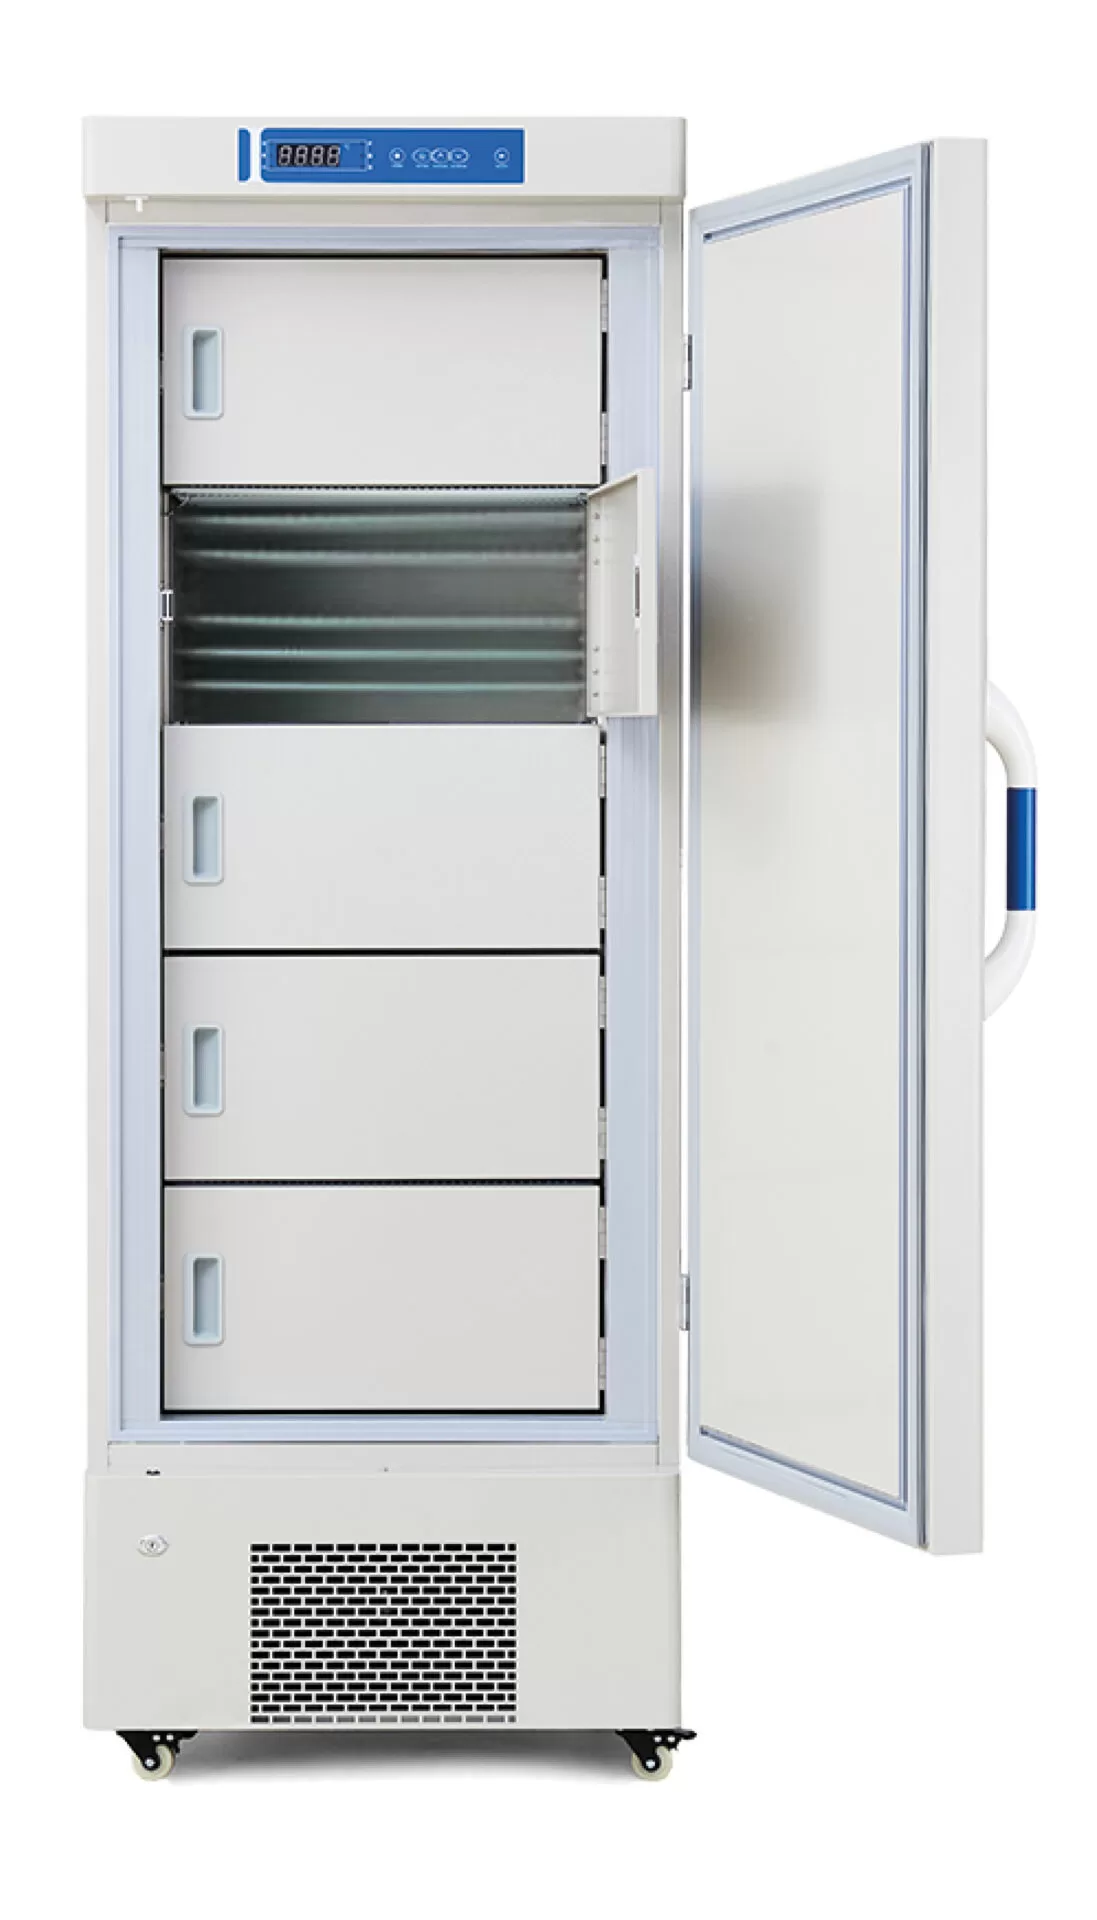 Introducing the Preseva -25º Plus Freezer: Rapid Cooling, Precise Control, and Energy-Efficient Design for Ultimate Storage Solutions.